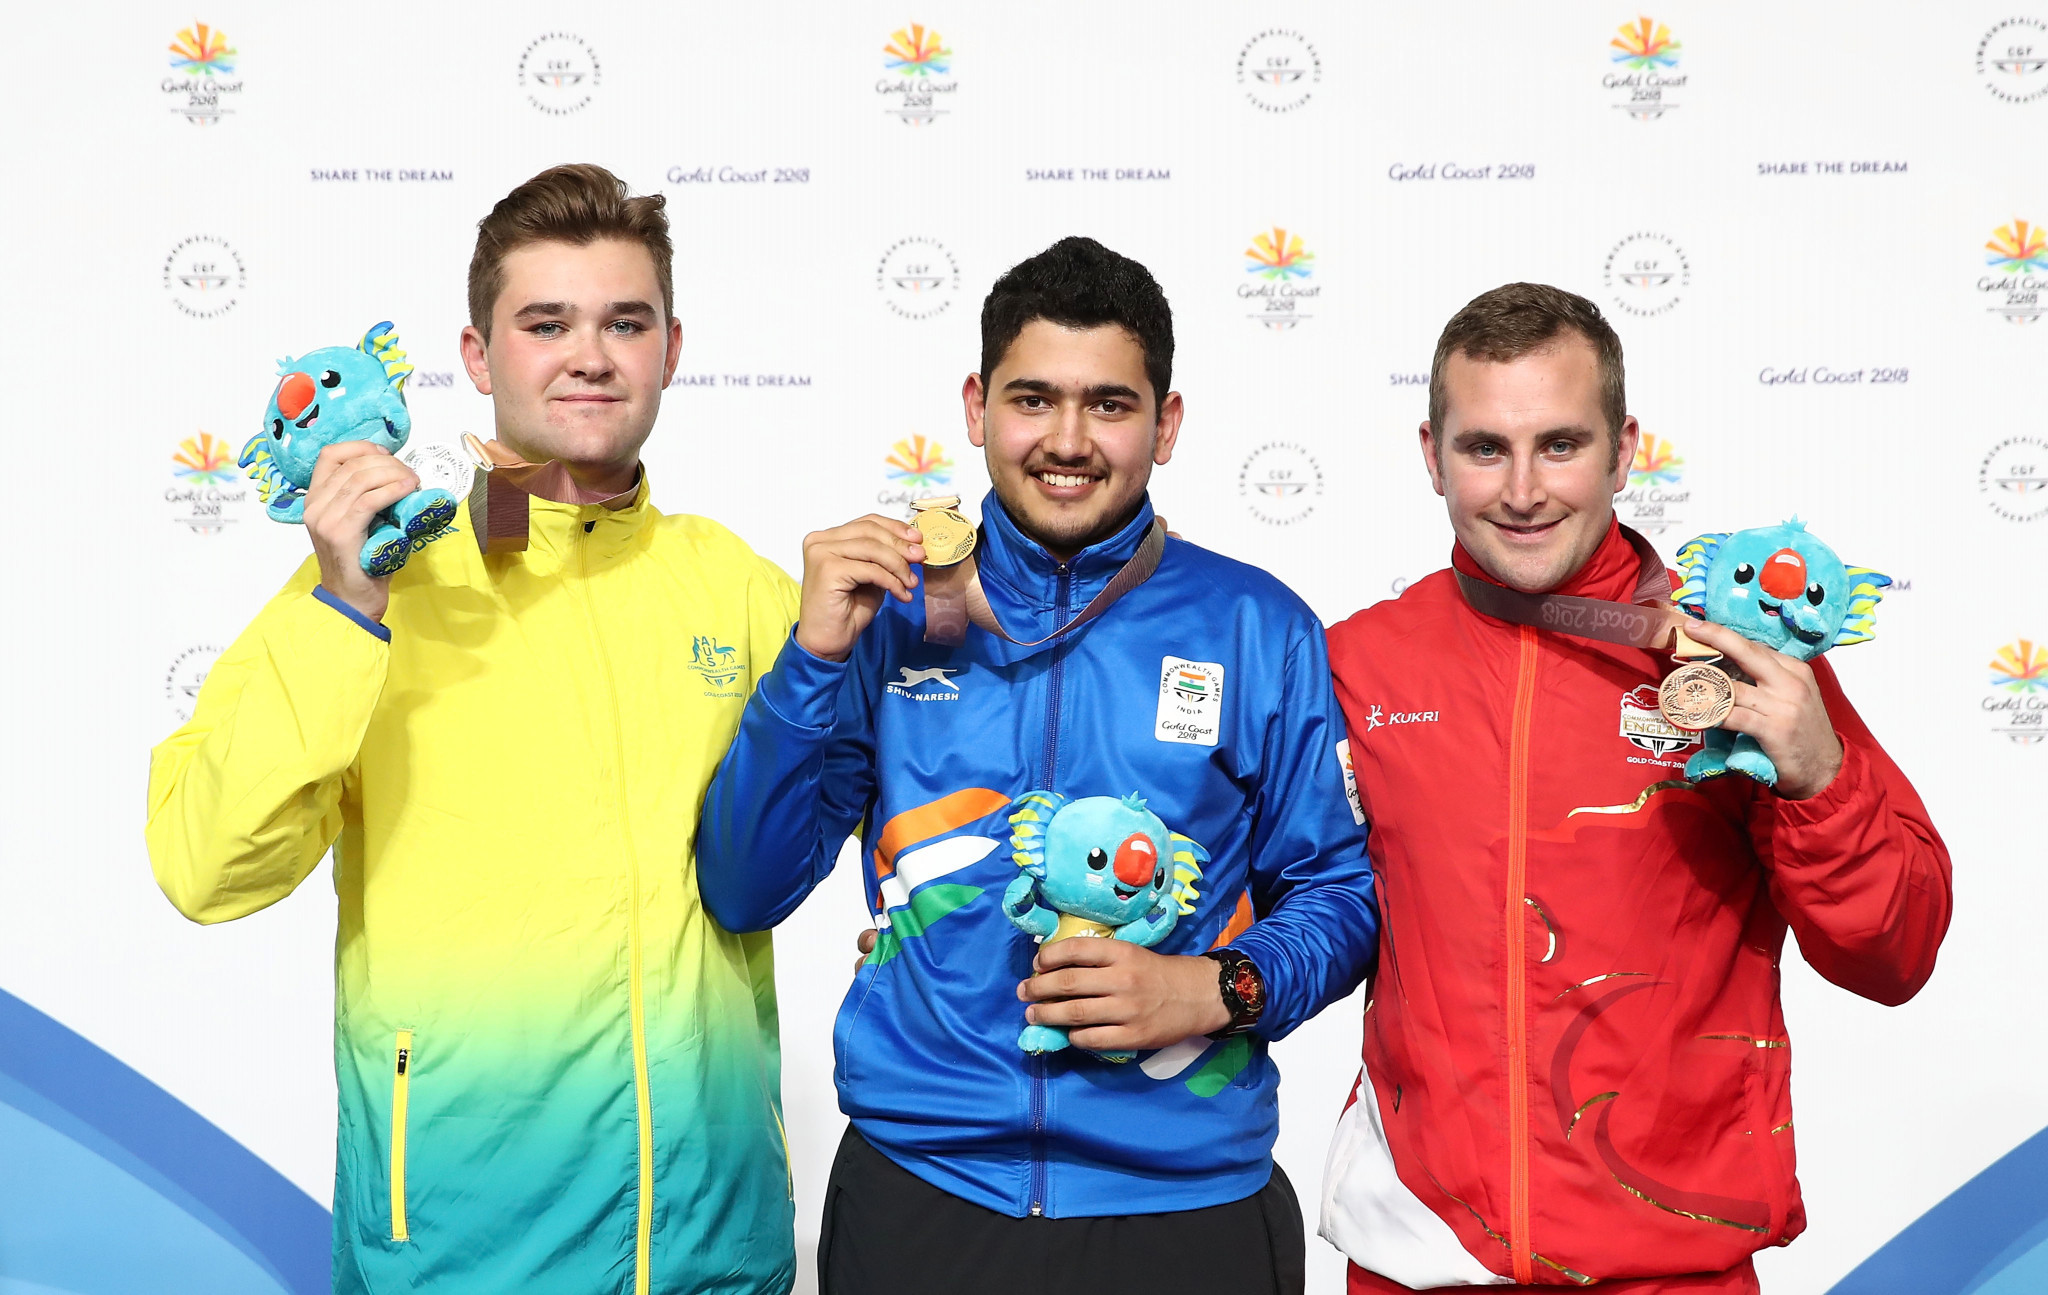 Anish Bhanwala shattered the Commonwealth Games record to become India's youngest gold medallist in the history of the event ©Getty Images